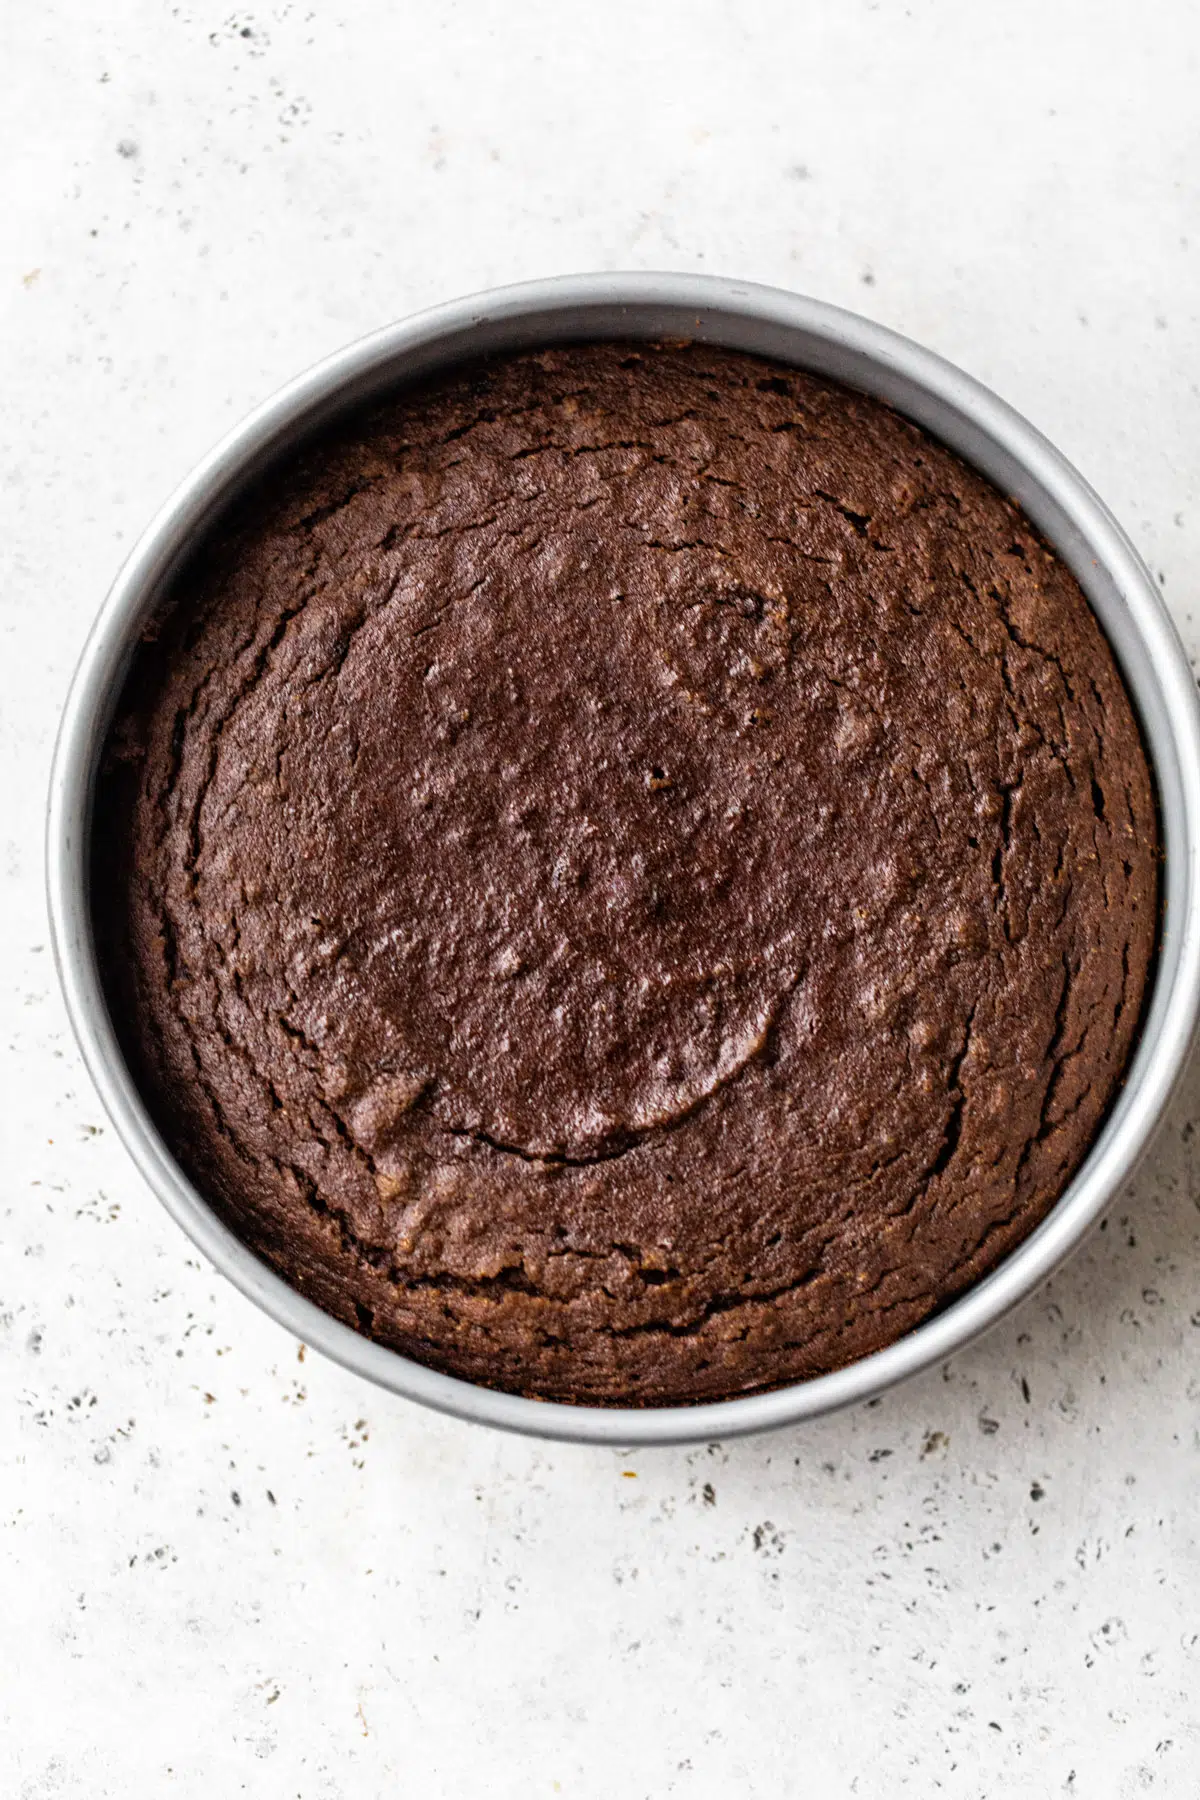 baked chocolate cake in a round cake pan